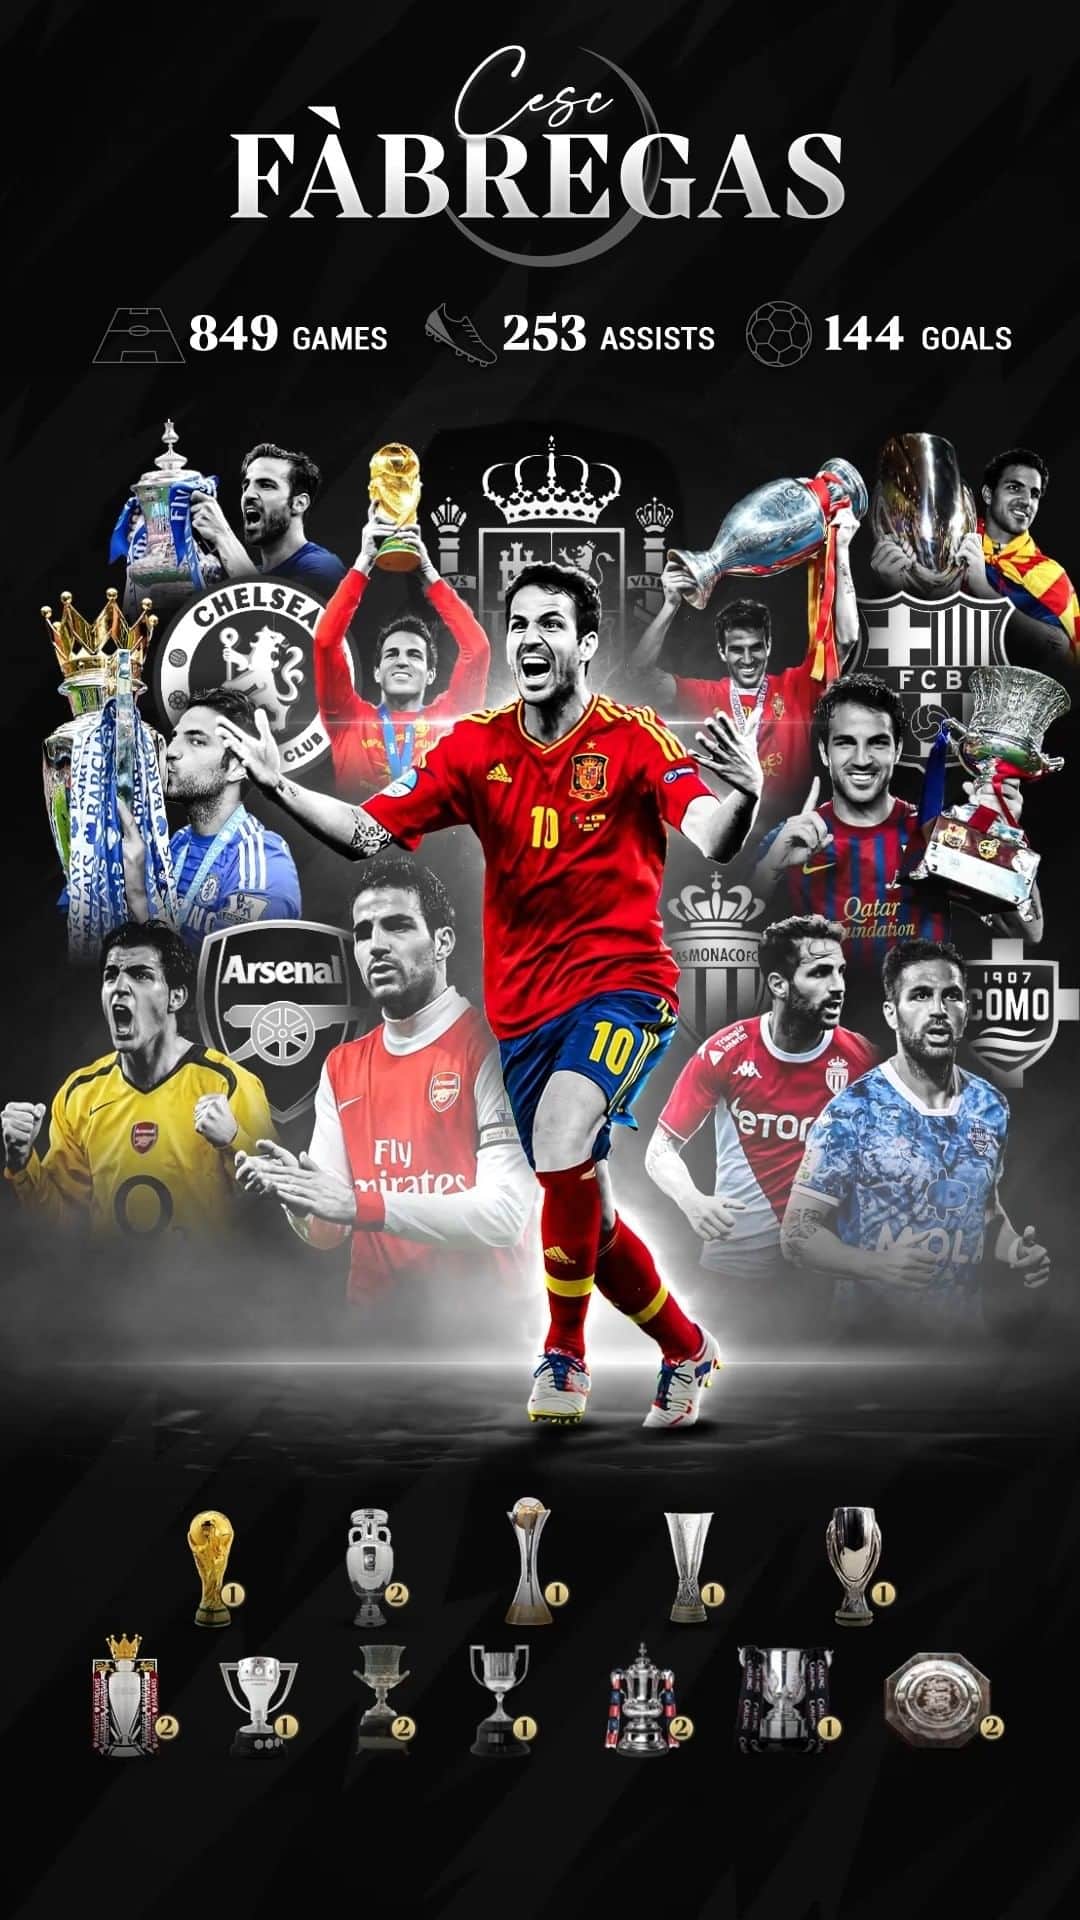 セスク・ファブレガスのインスタグラム：「It is with great sadness that the time has come for me to hang up my playing boots.  From my first days at Barca, Arsenal, Barca again, Chelsea, Monaco and Como, I will treasure them all.   From lifting the World Cup, the Euros, to winning everything in England and Spain and nearly all the European trophies, it has been a journey that I’ll never forget.  All those who have helped me, my teammates, coaches, directors, presidents, owners, fans and my agent. To all my family, from my parents and my sister to my wife and kids, I cherish your advice, mentorship and guidance. To my opponents who tried to knock me, thank you for making me stronger.   It has already been more than worth it with all the great memories and friends that I have made on the way.   I’ve also learnt 3 languages and became more compassionate and wiser along my travels.  I lived experiences that I never thought in a million years I would even come close to.  It’s not all sadness though as I’m now going to cross the white line and start coaching the B and Primavera teams of Como 1907. A club and a project I couldn’t be more excited about. This charming football team won my heart from the first minute and came to me at the perfect time in my career. I will grab it with both hands.   So after 20 incredible years full of sacrifice, dedication and joy, it’s time to say thank you and goodbye to the beautiful game.   I loved every minute.  Cesc」